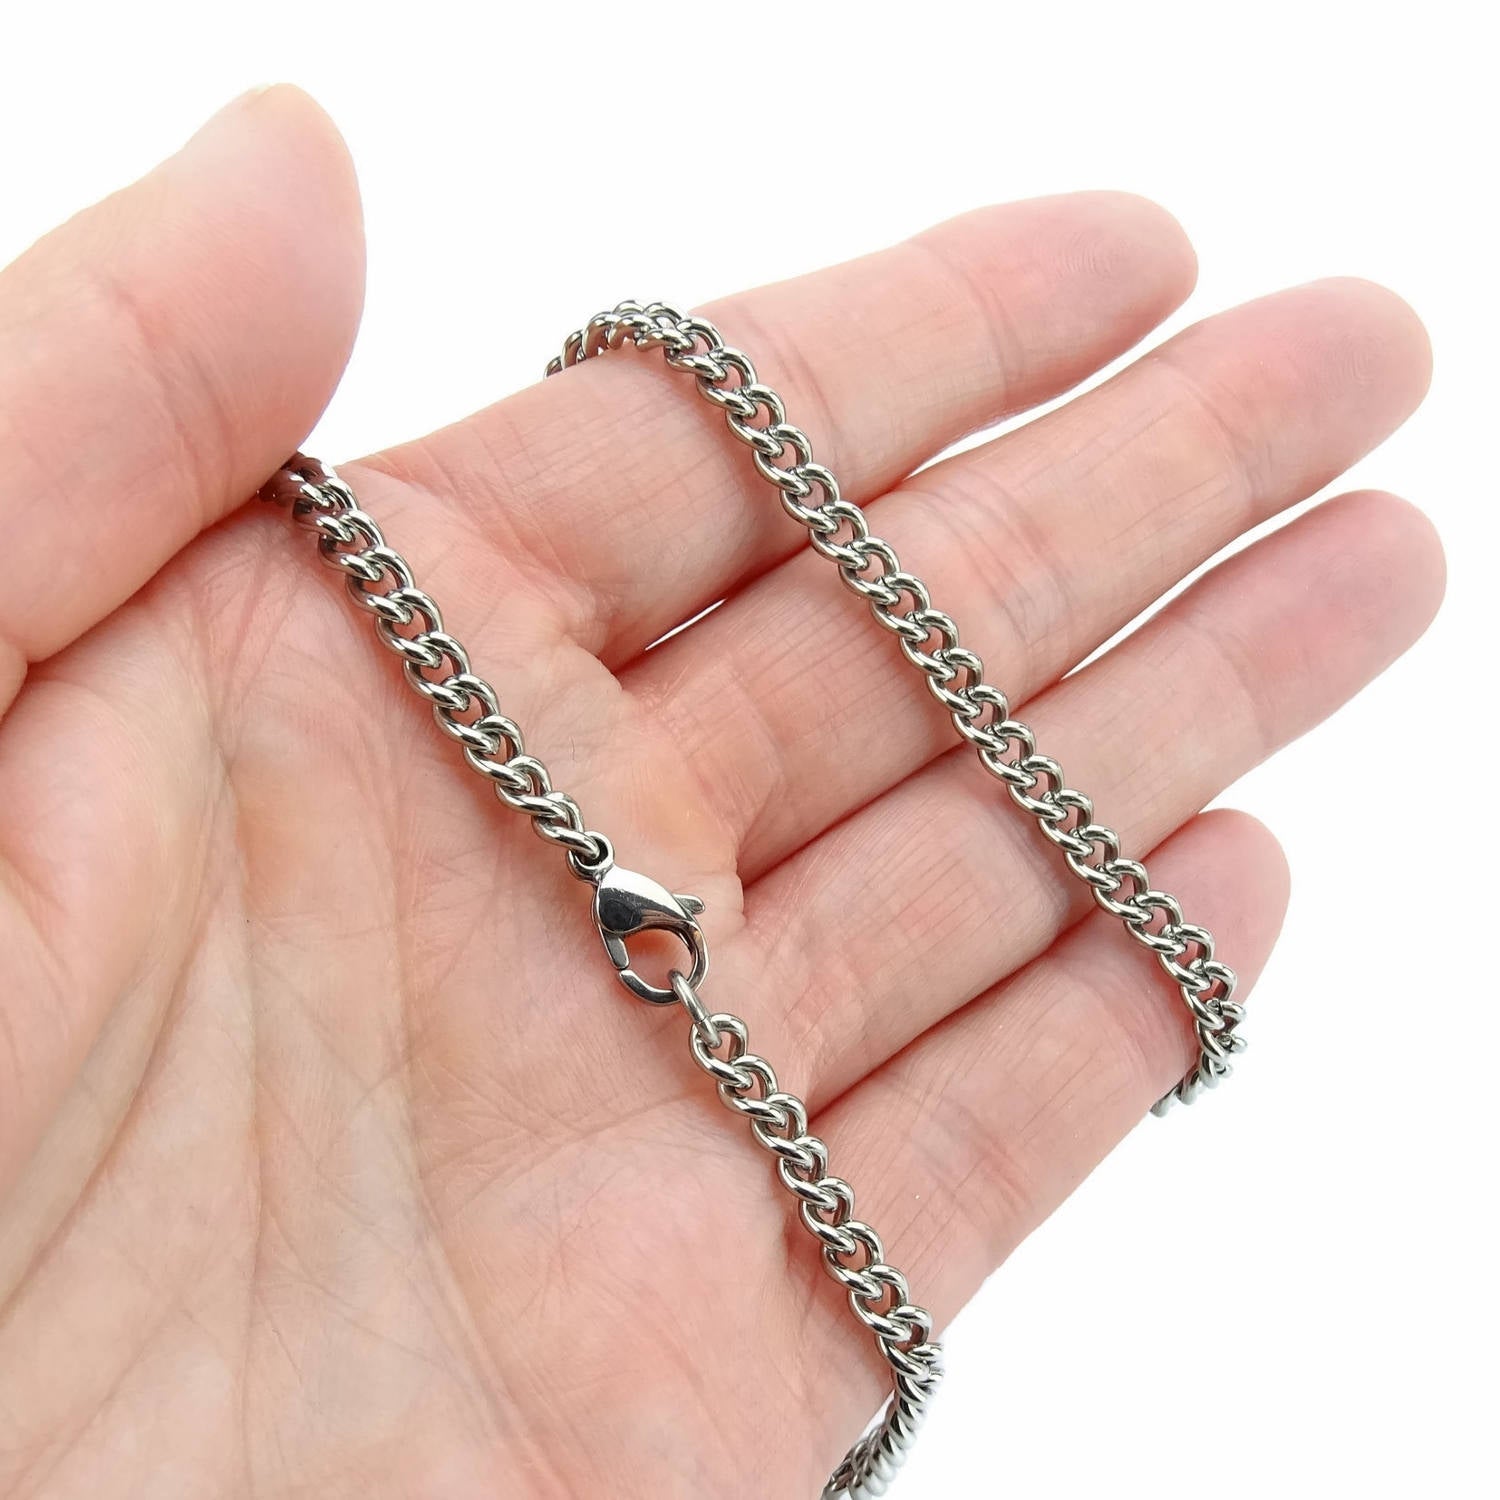 Mens Curb 20 Inch Silver Chain Necklace Set 925 Silver Fashion 20 Inch  Silver Chain, 12mm Width, 28inch Length, King Size From Haoyun51828, $37.91  | DHgate.Com